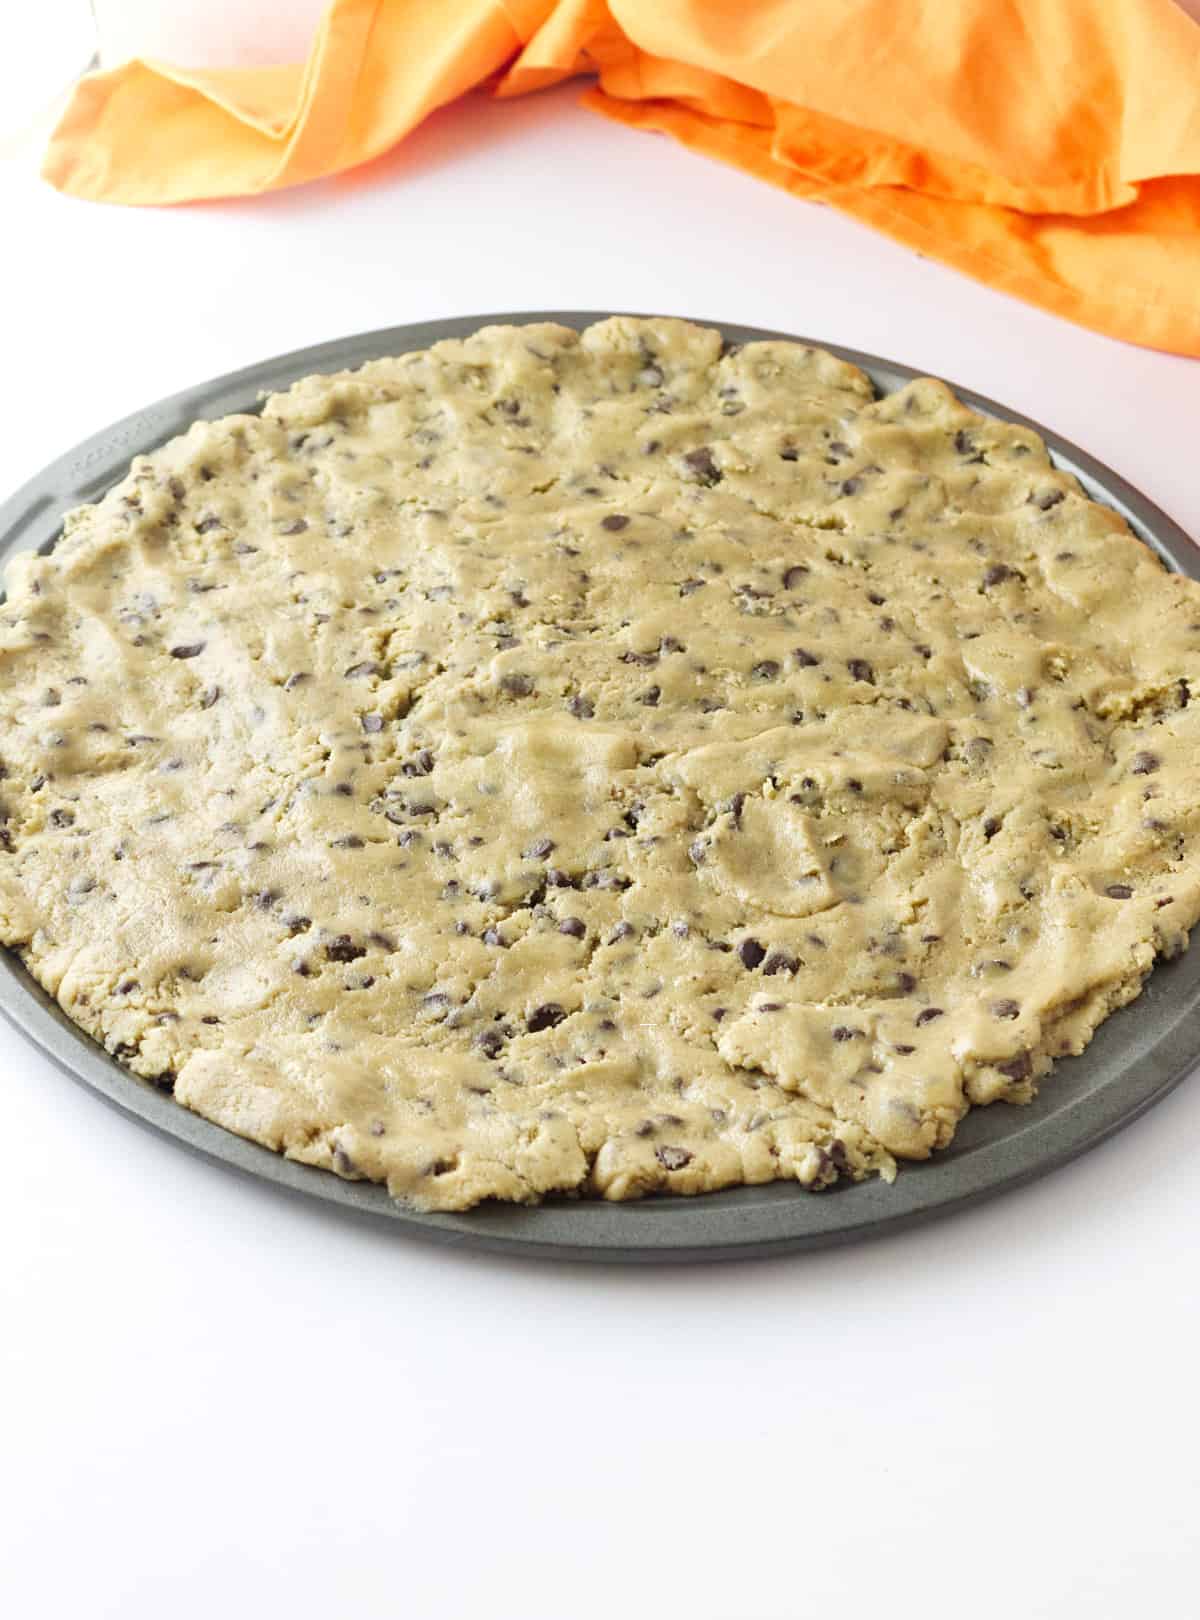 Pillsbury chocolate chip cookie dough pressed into a round pizza pan.